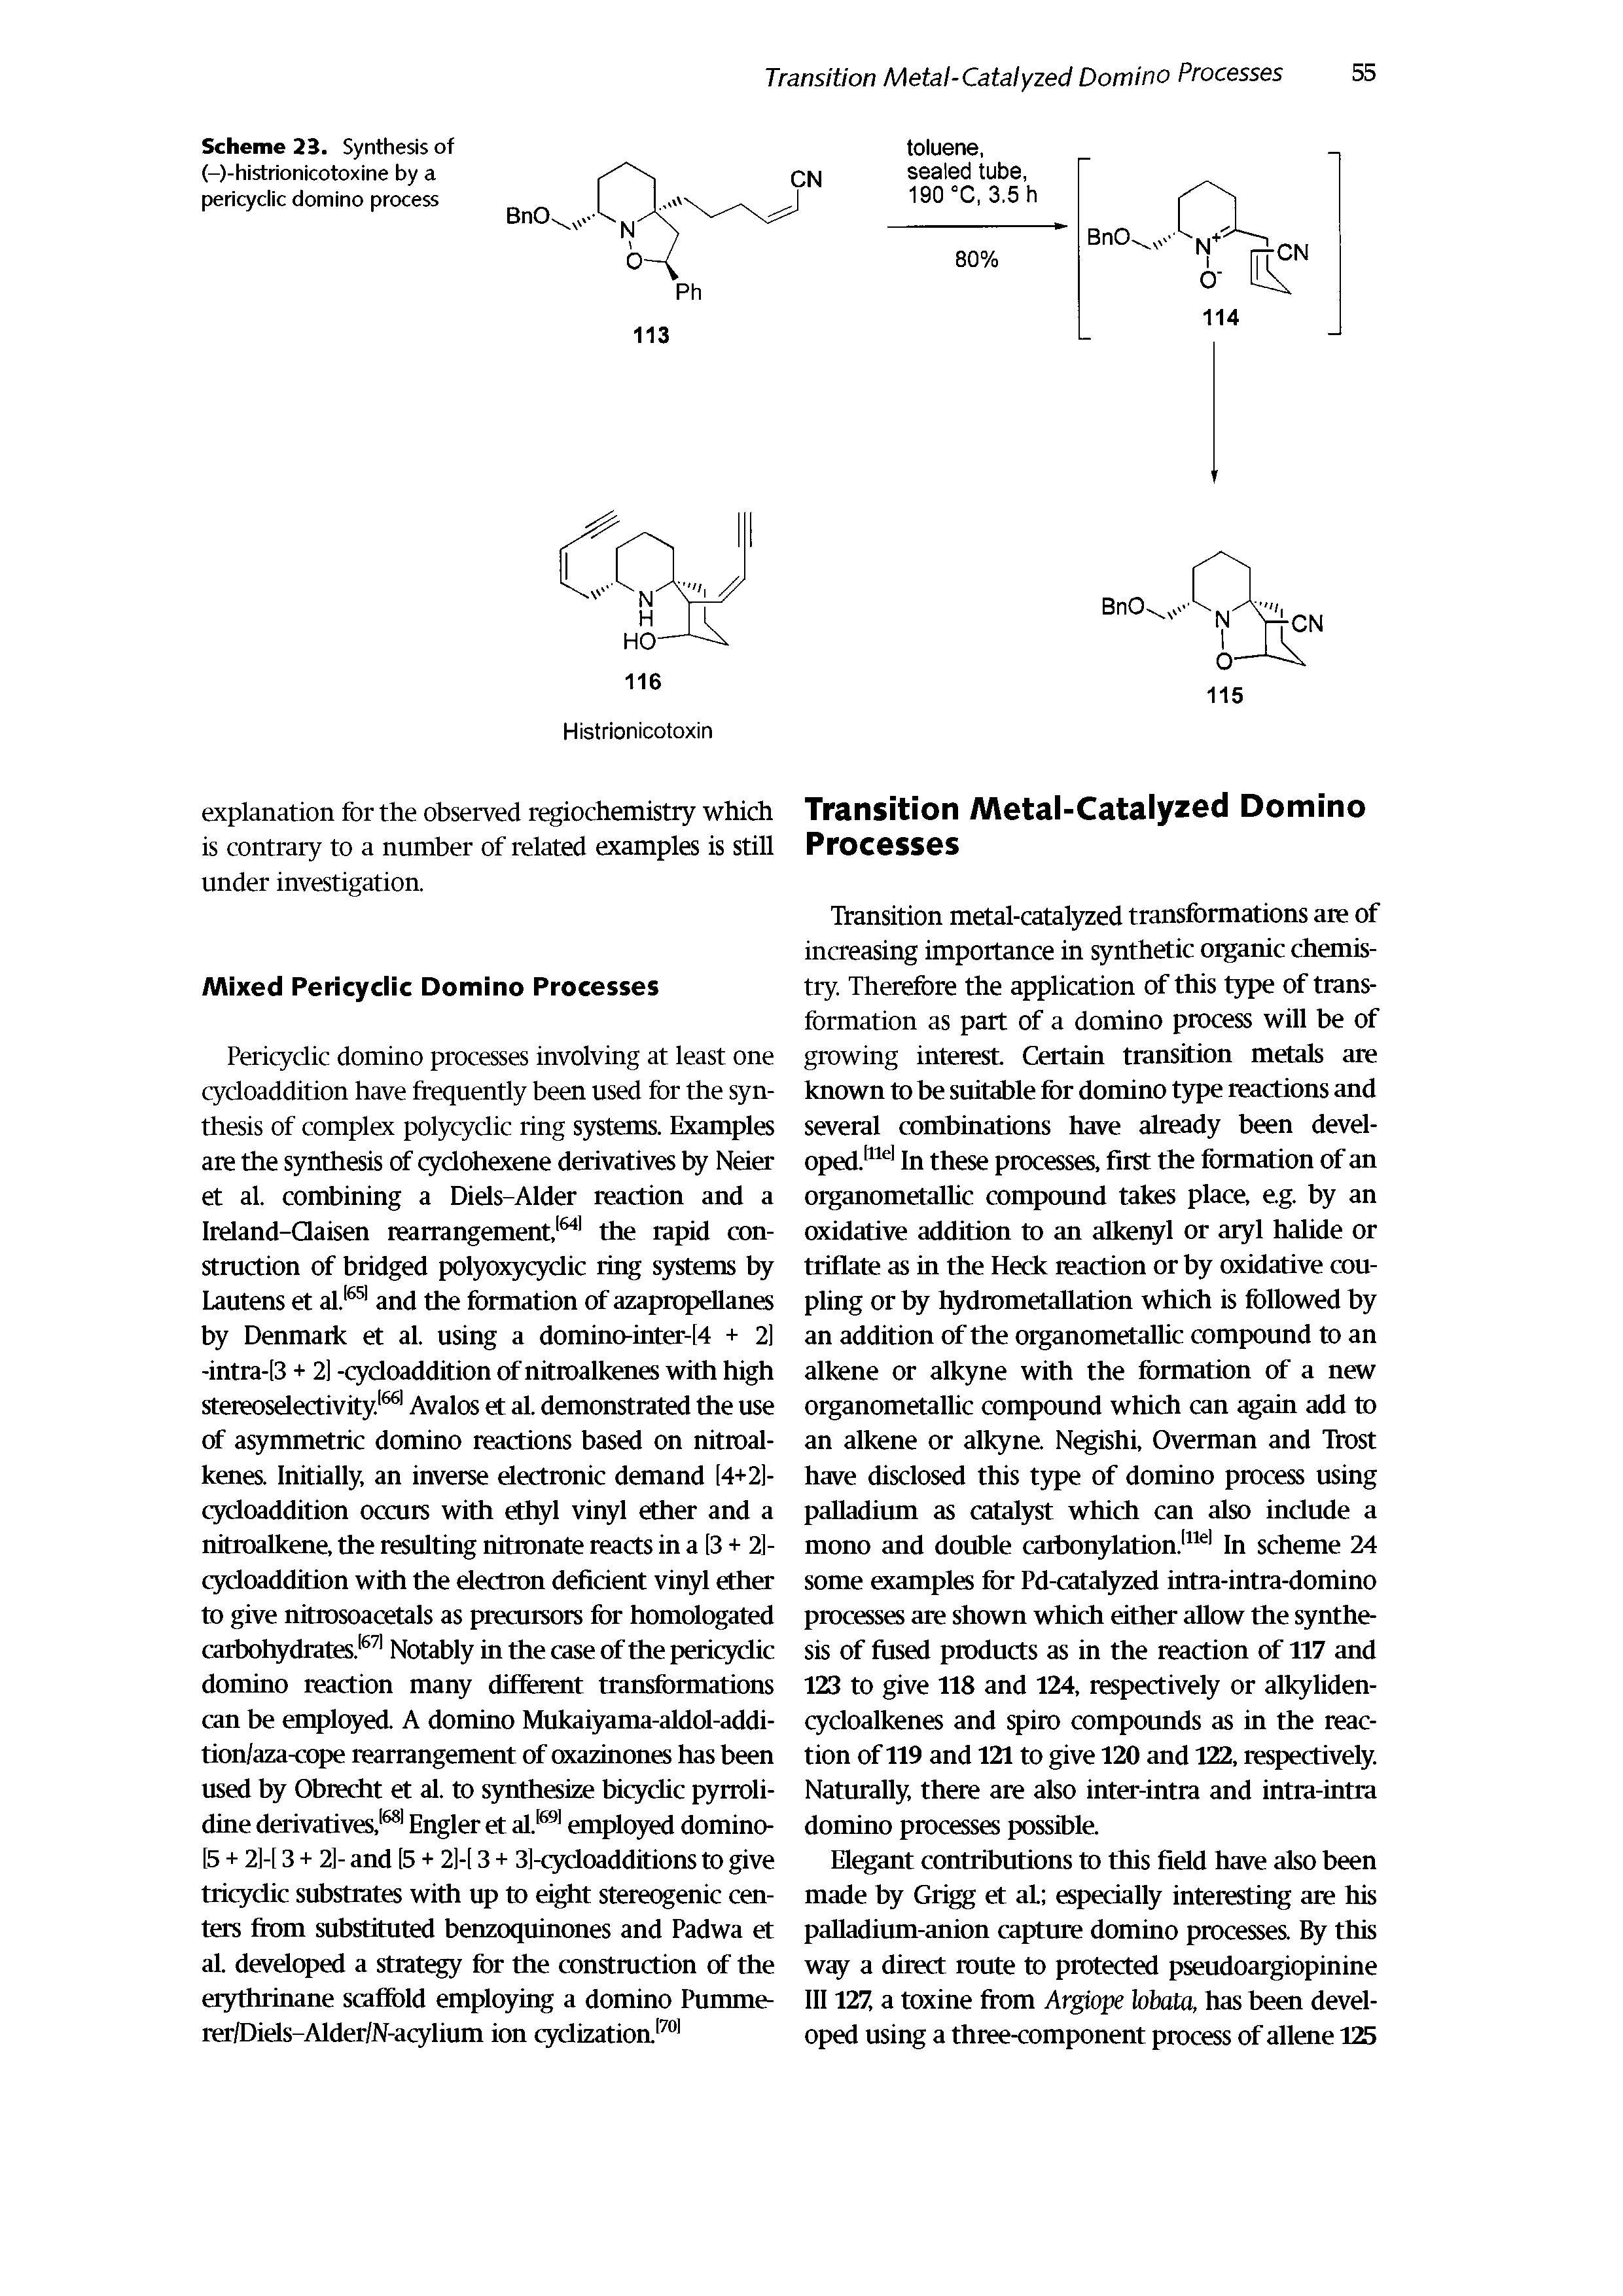 Scheme 23. Synthesis of (-)-histrionicotoxine by a peri cyclic domino process...